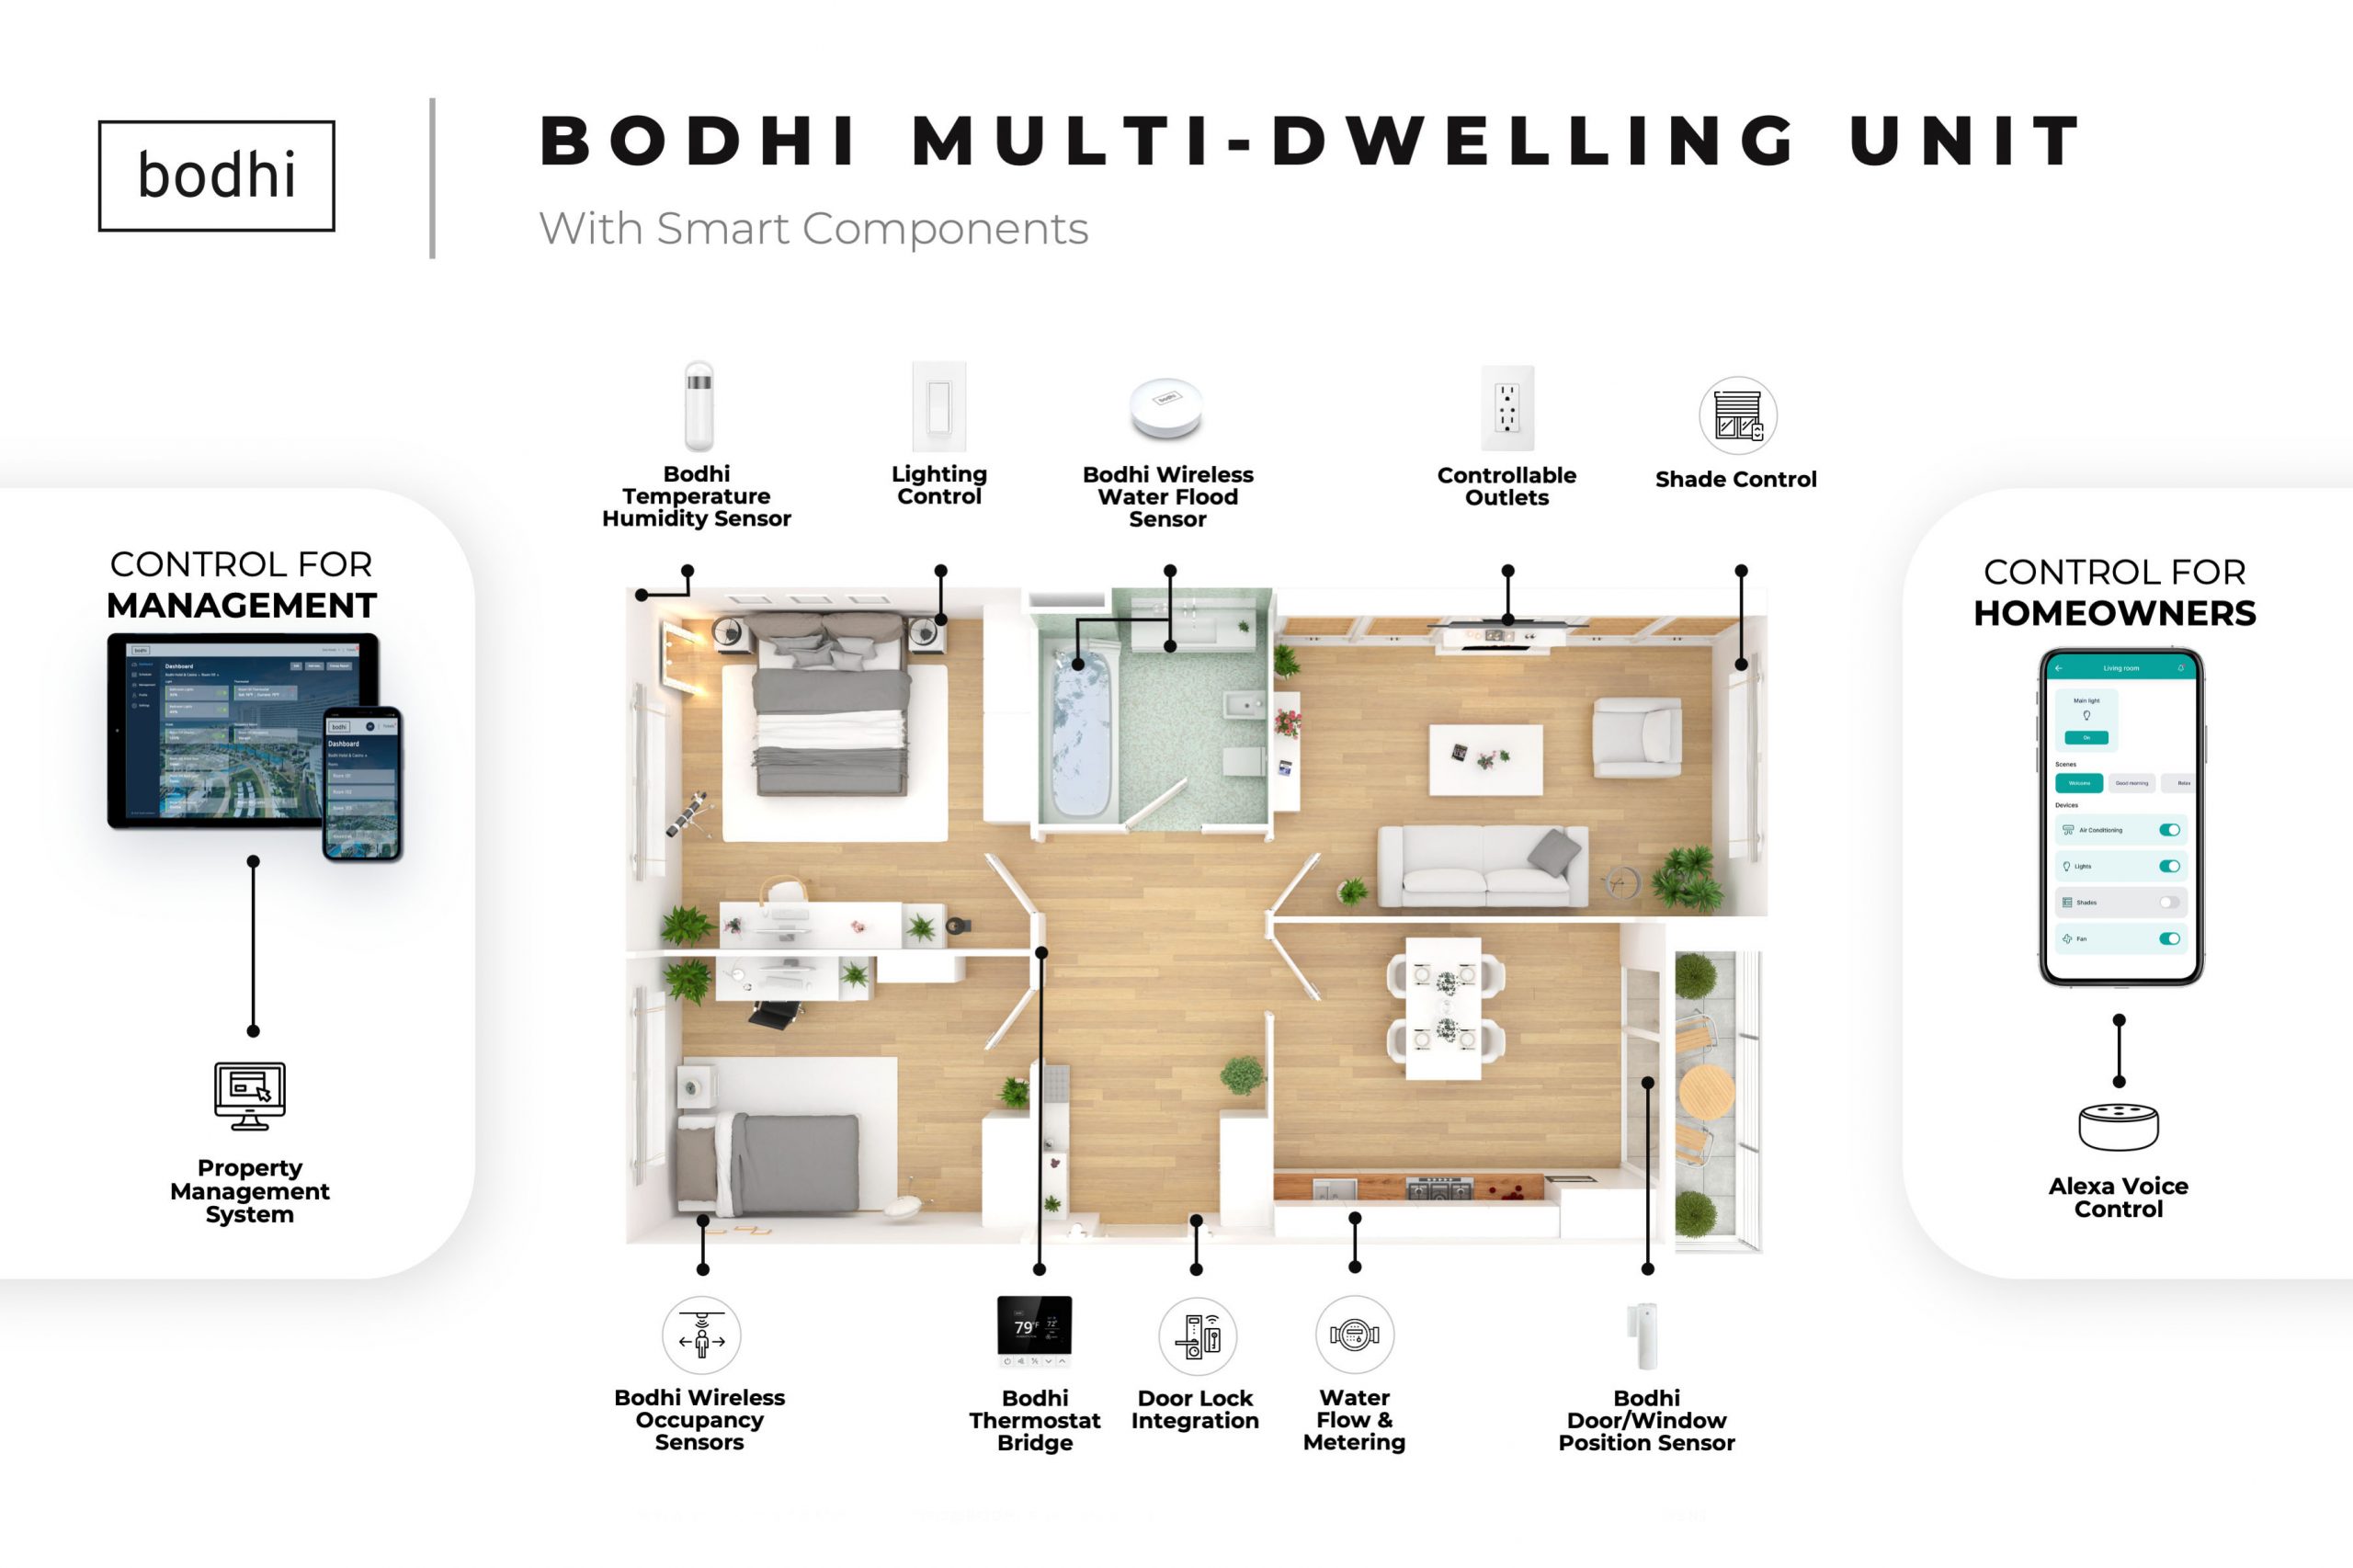 Bodhi installed in a condominium, showing the various sensors and devices